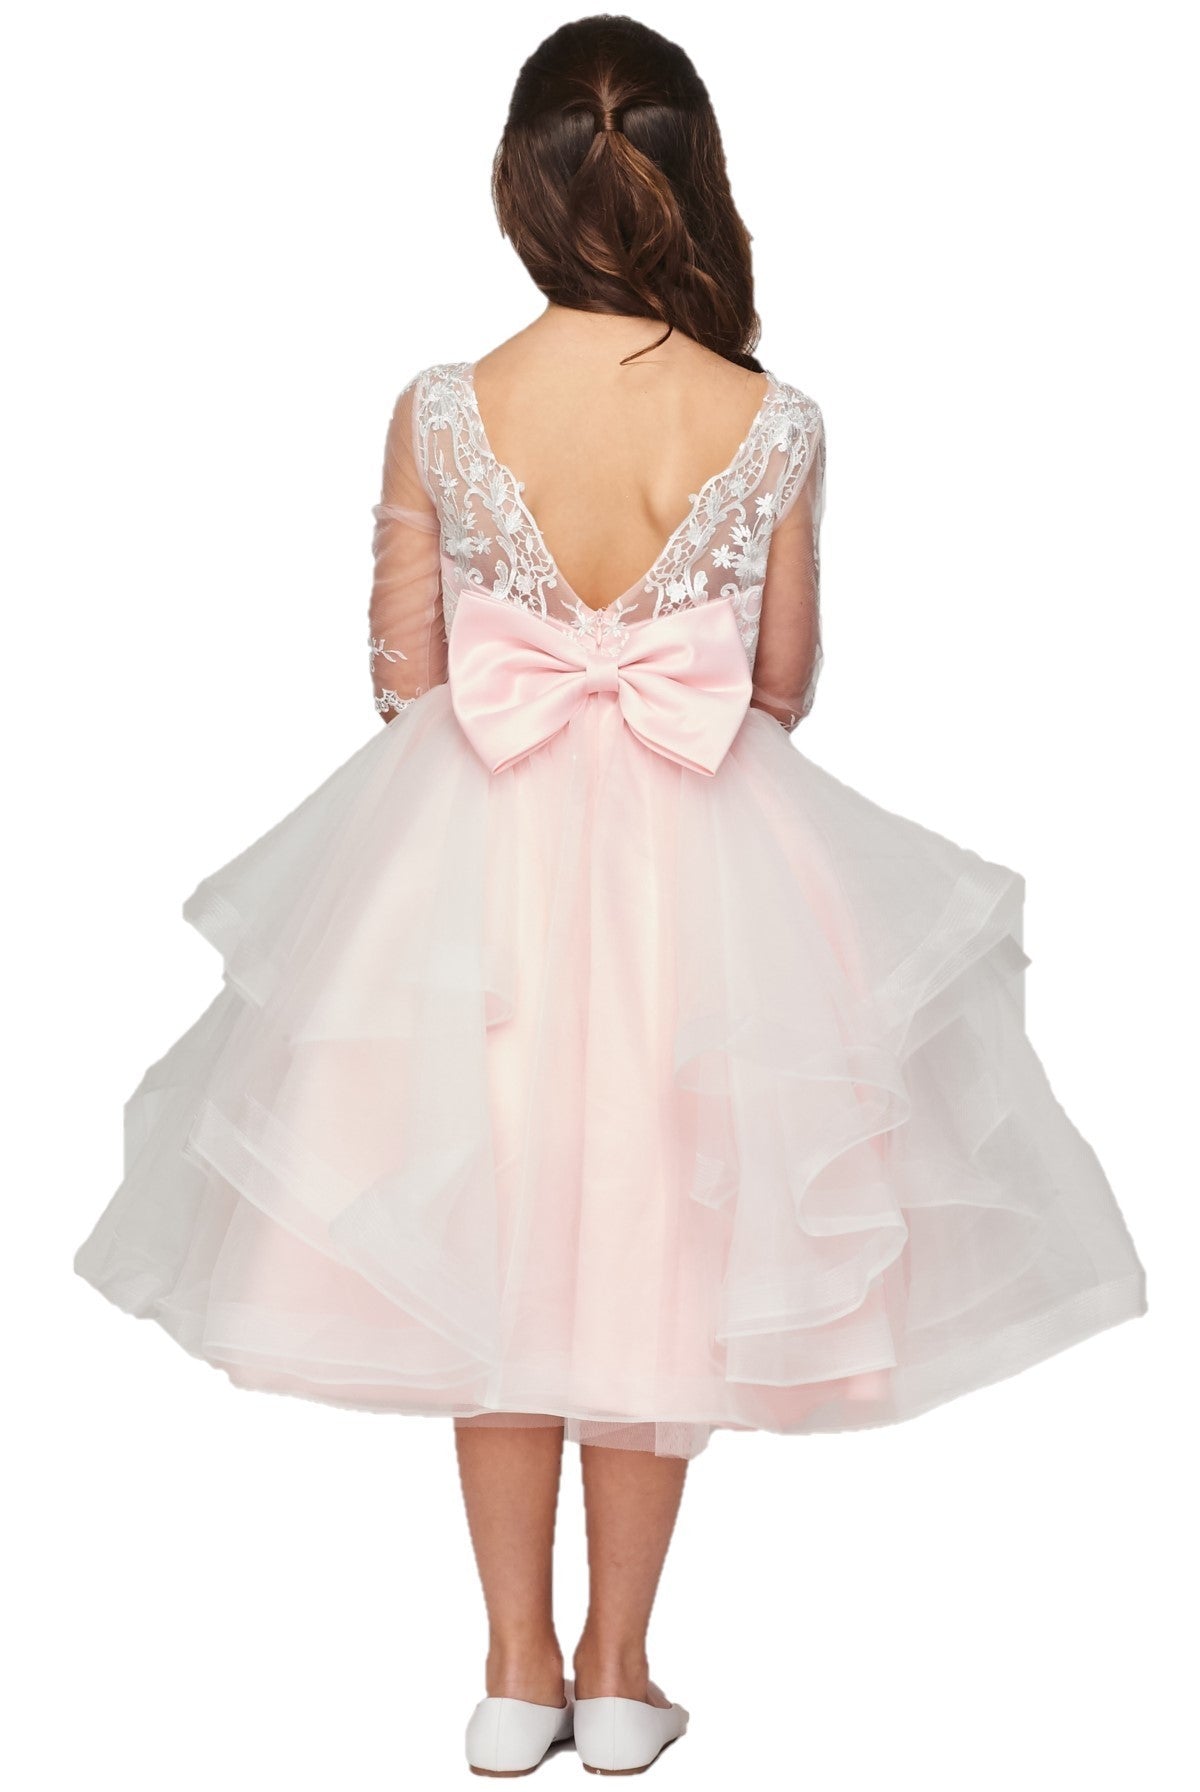 Satin Soft Tulle Flower Girl Dress by Cinderella Couture USA AS5075